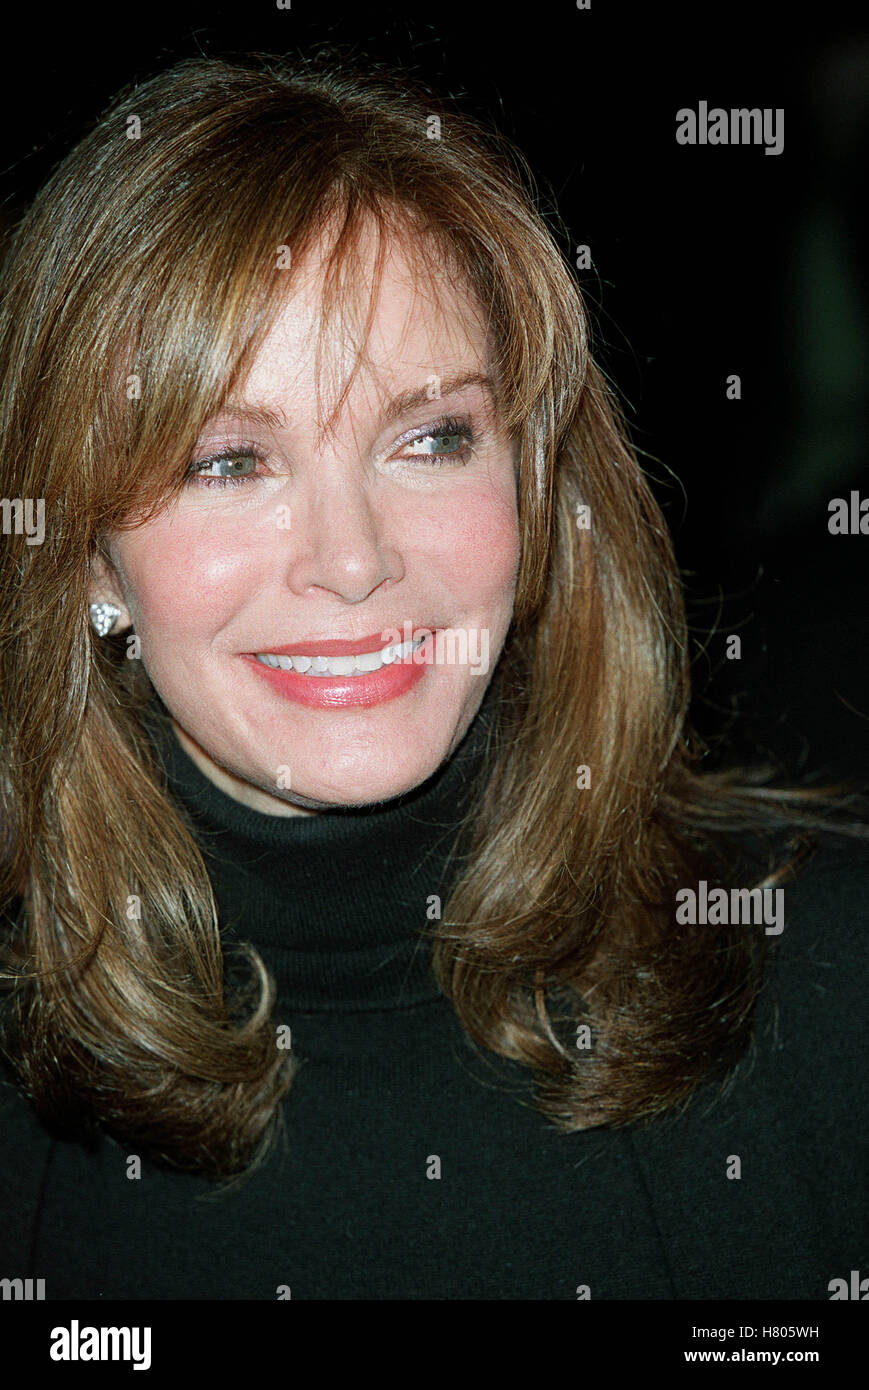 Pics of jaclyn smith